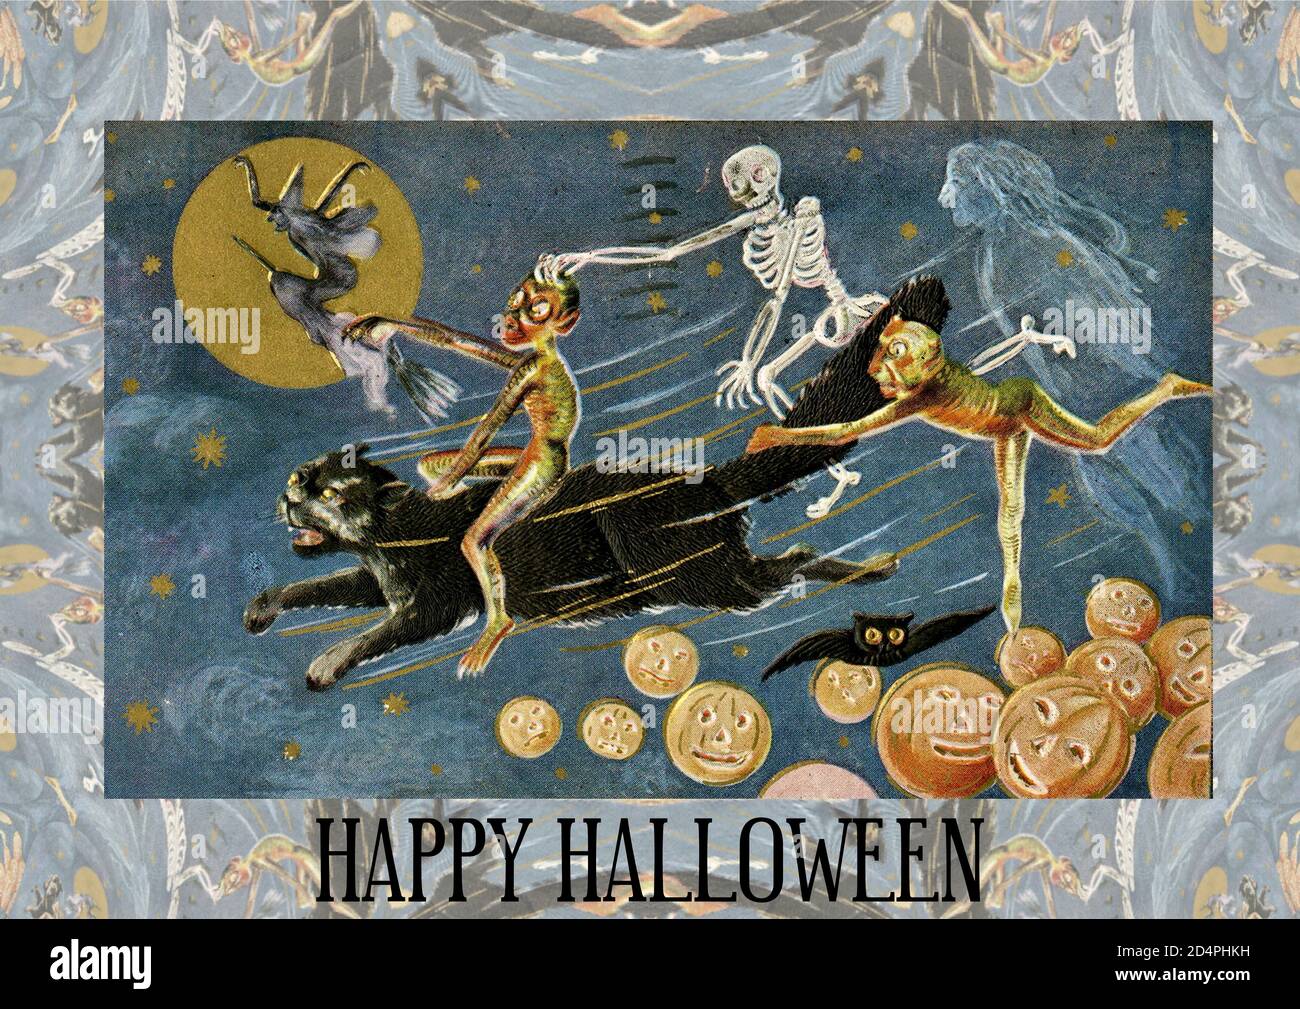 Vintage Halloween picture, Pumpkins Galore, with an imp riding a cat in the night sky with witch, broomstick, skeleton, bat and ghost. Stock Photo